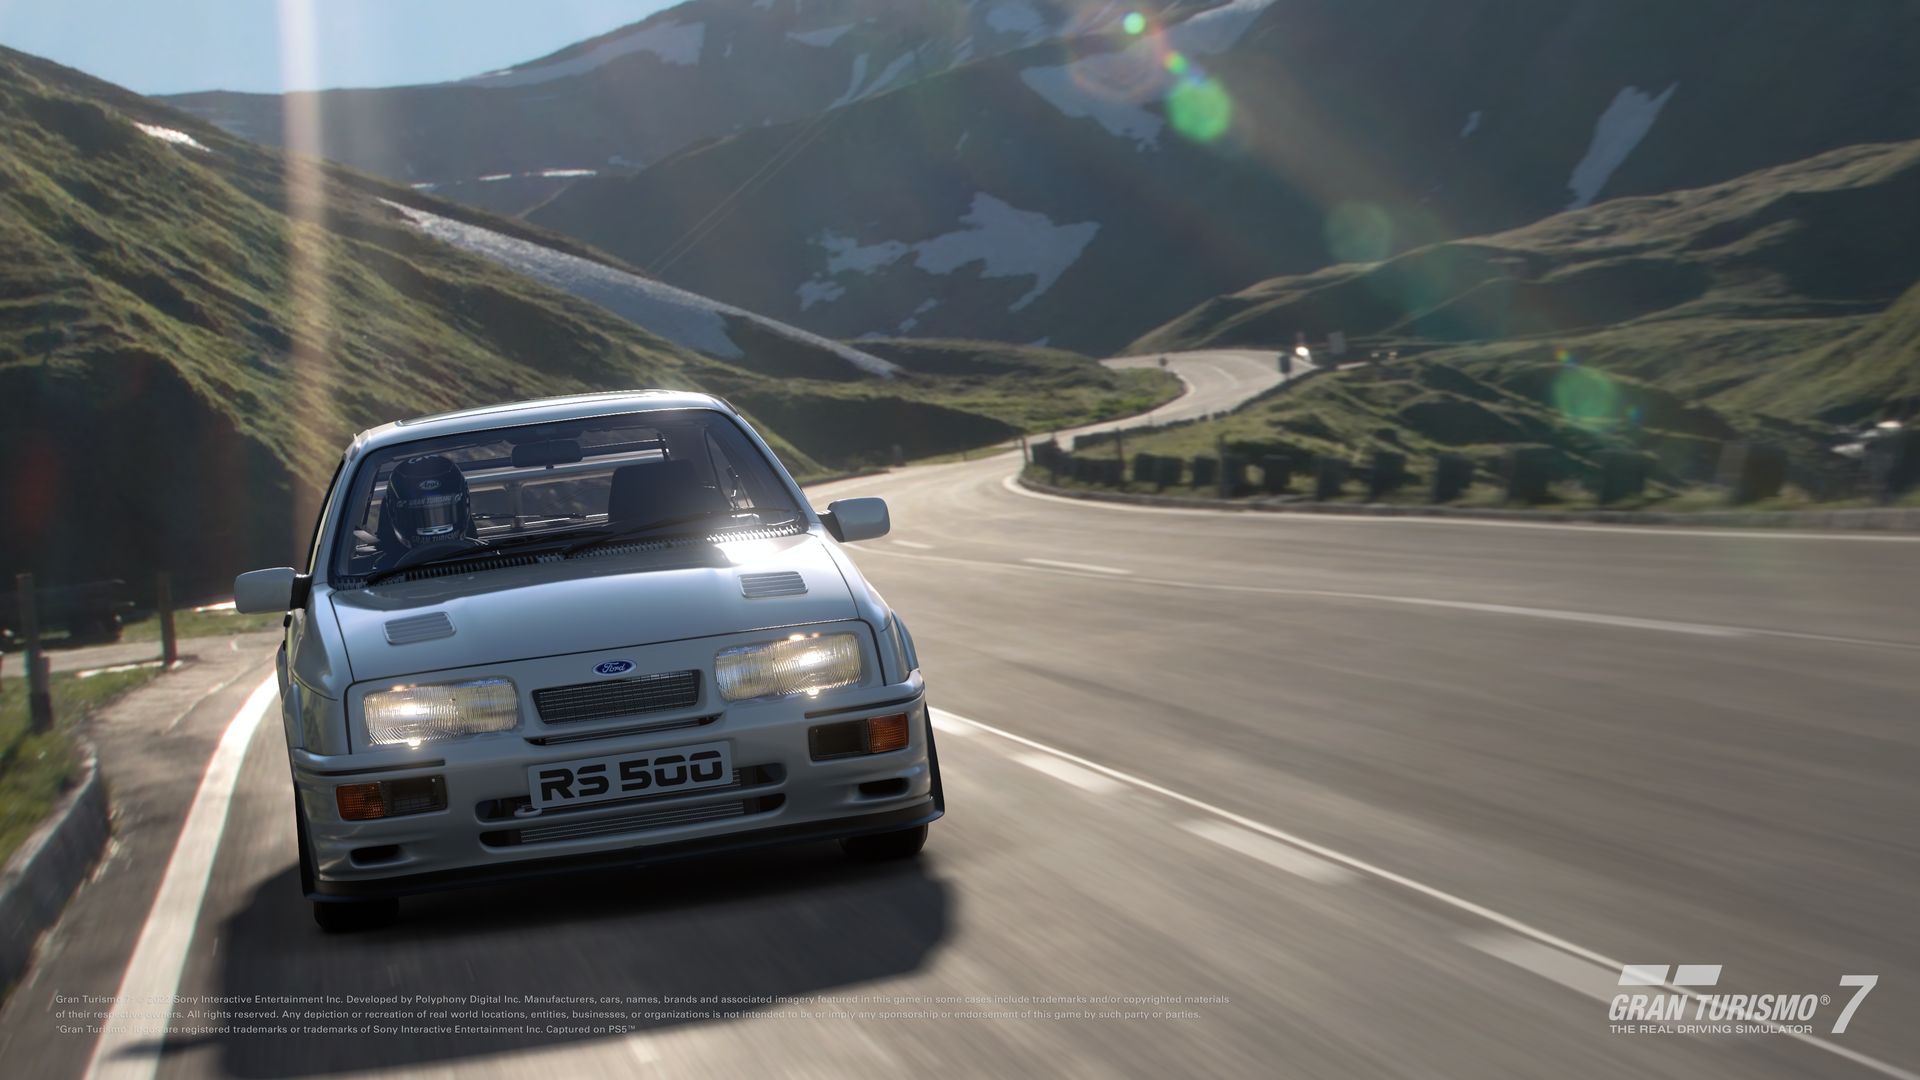 Gran Turismo 7': New Offers, Freebies in Celebration of the Franchise's 25th  Anniversary